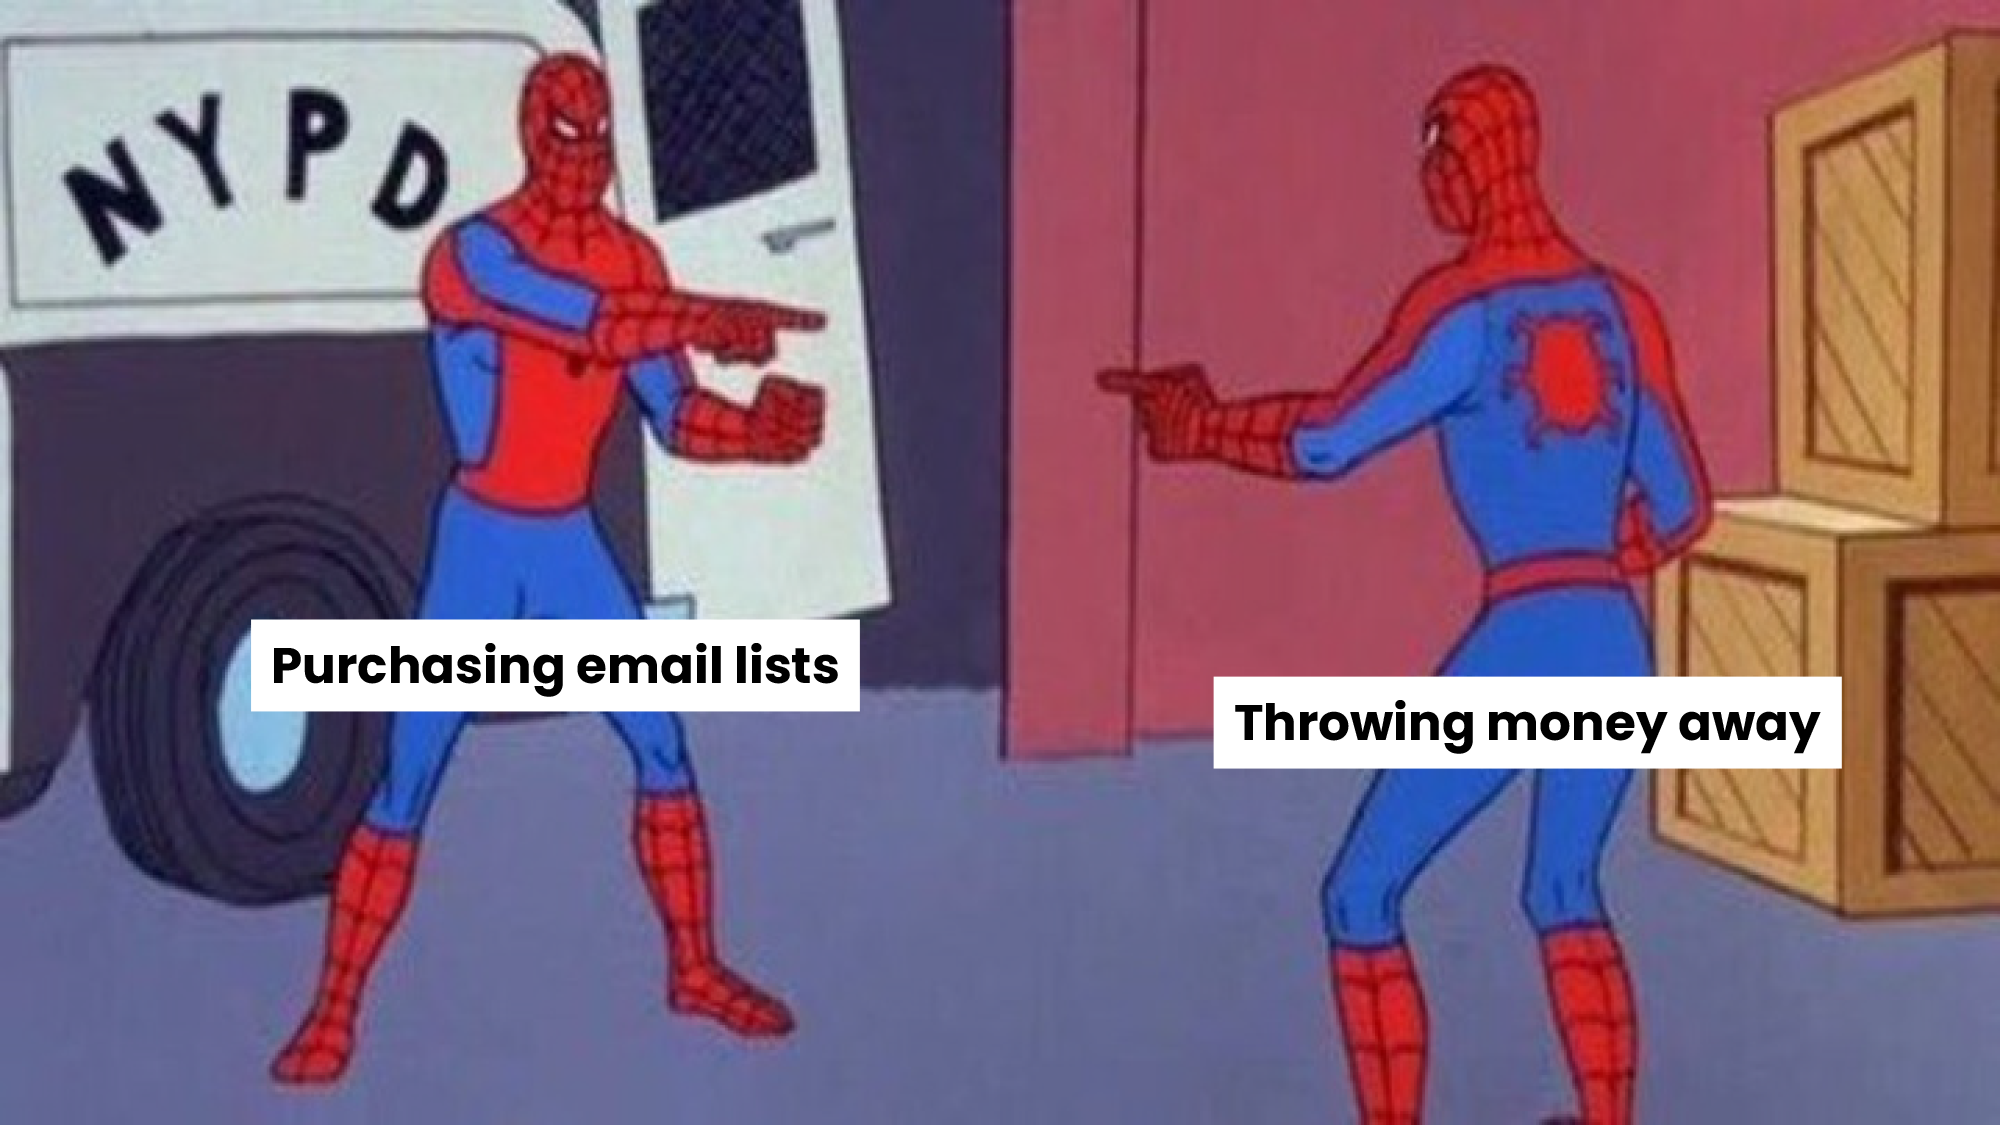 spiderman meme - purchased email lists